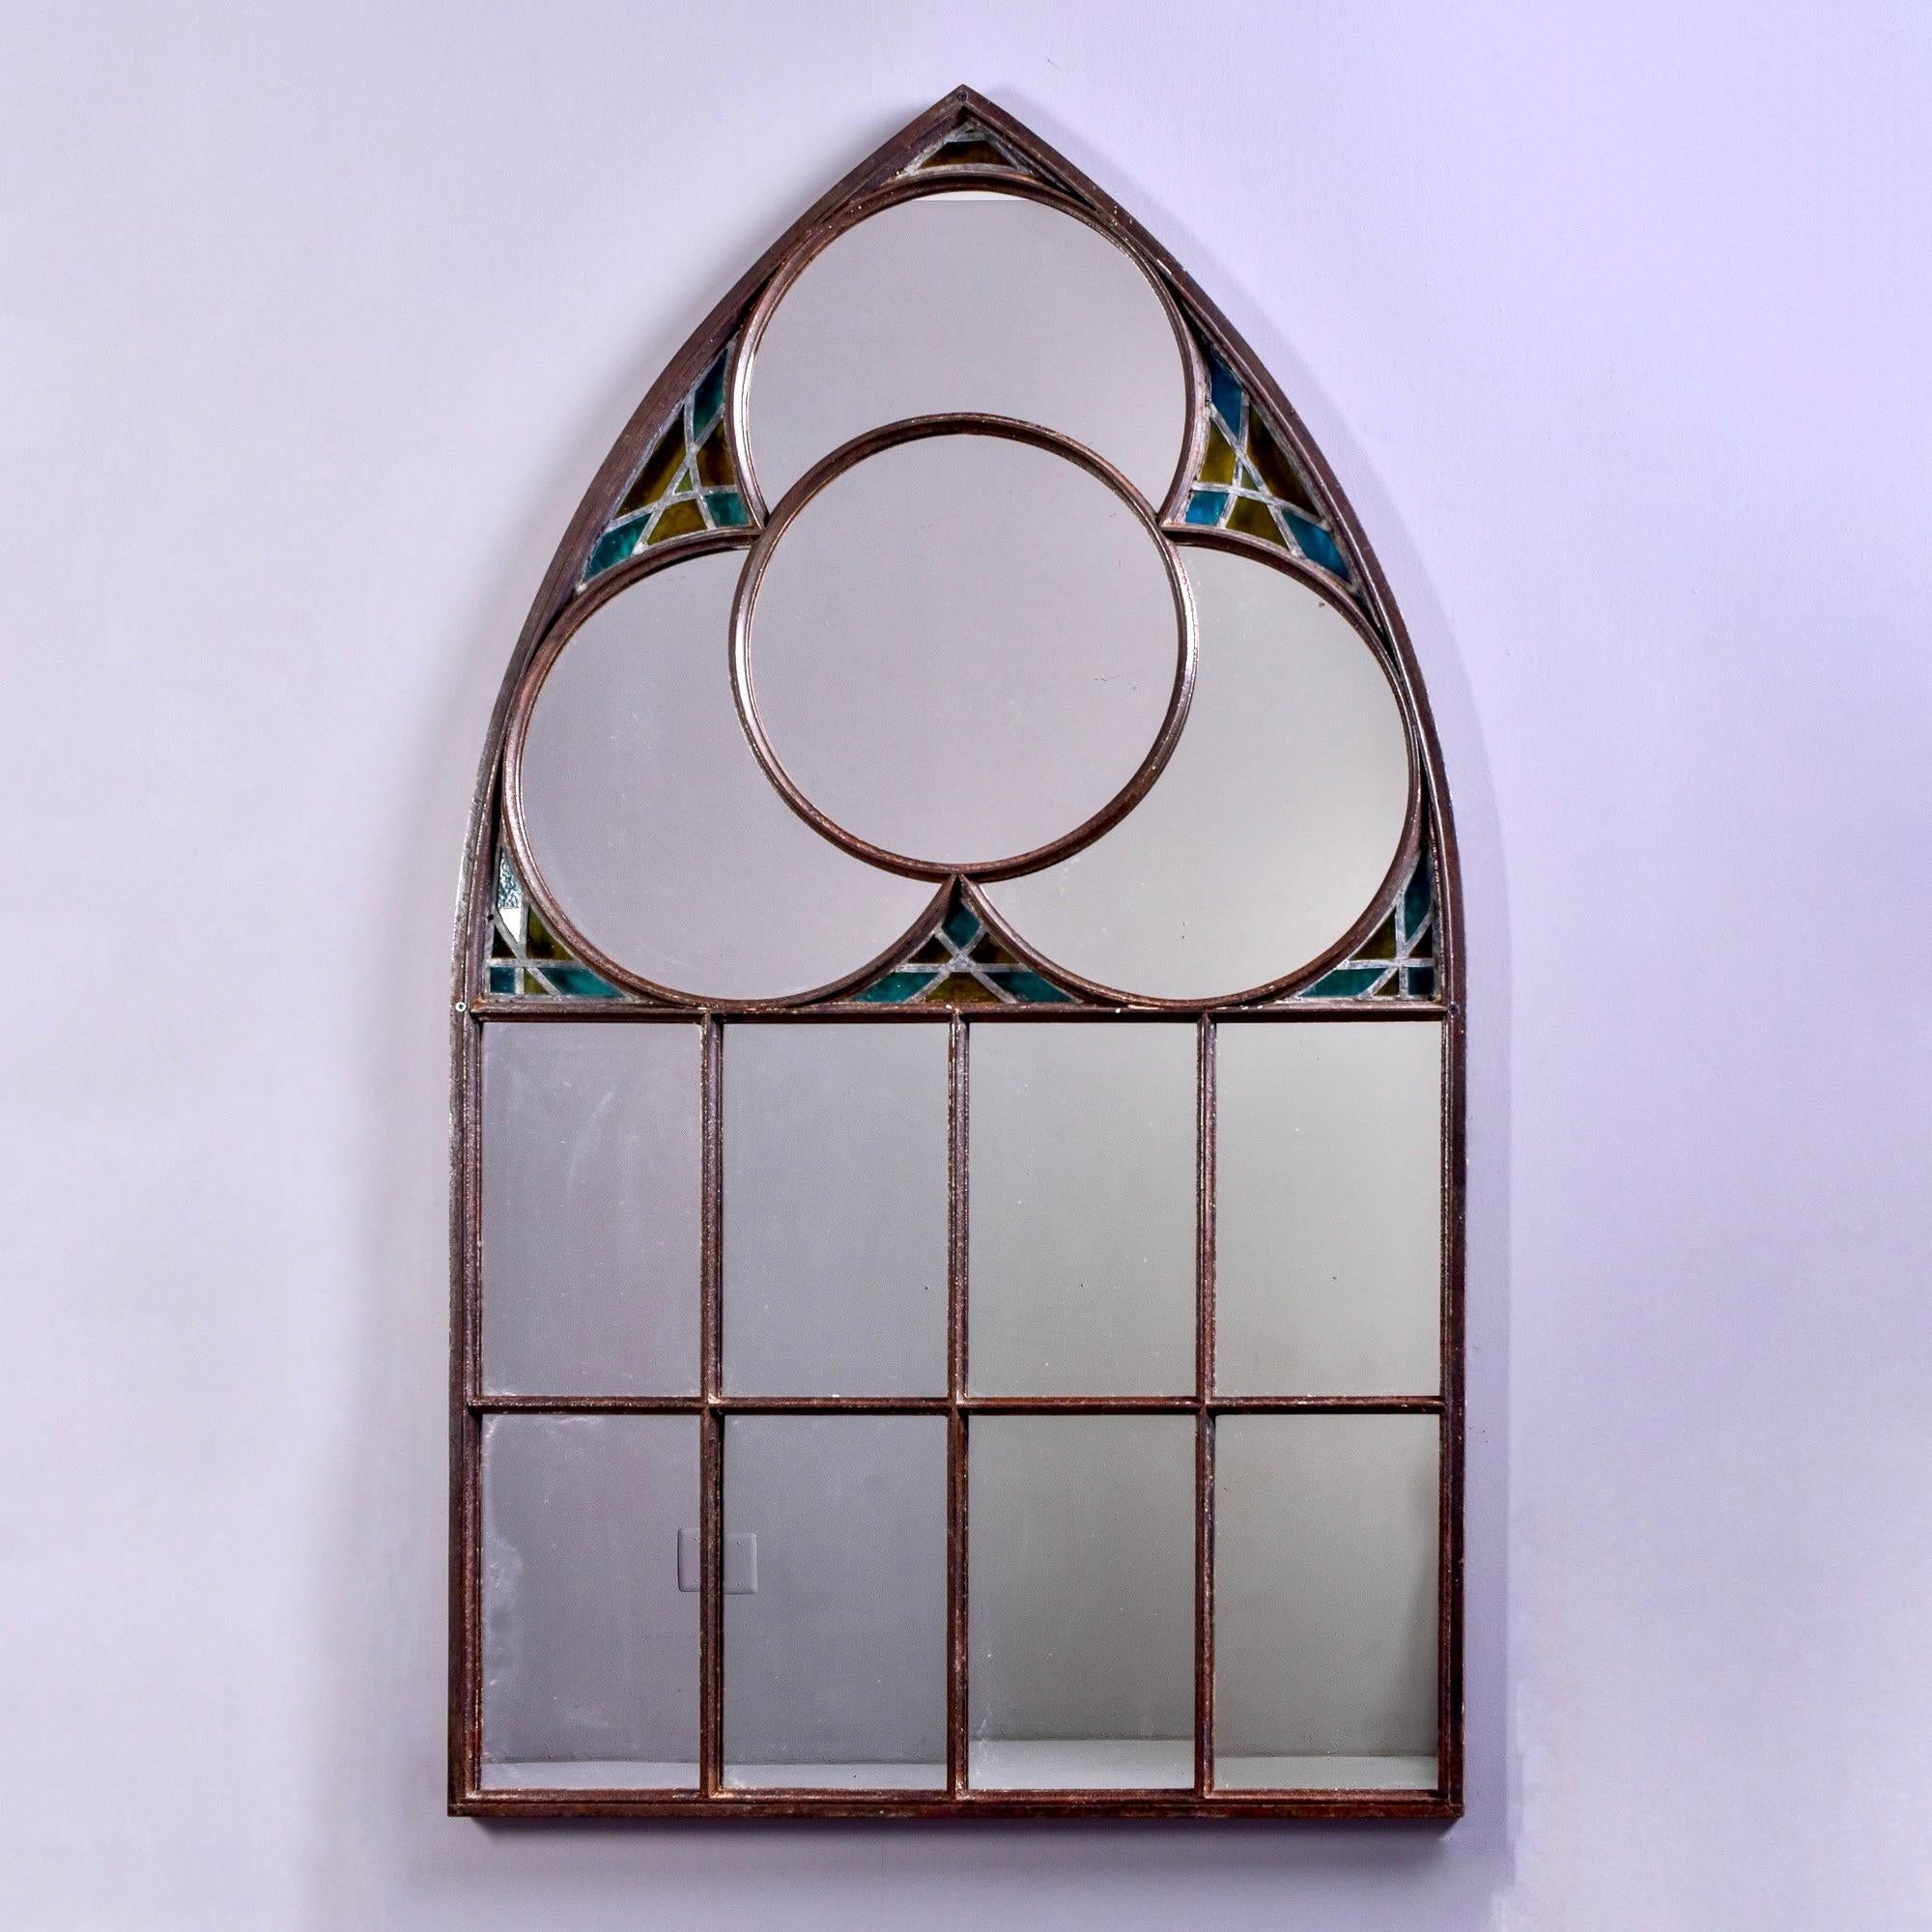 Found in France, this circa 1890s iron framed church window with stained glass has been refitted with a mirror. Stands over five feet tall. Original church is unknown.